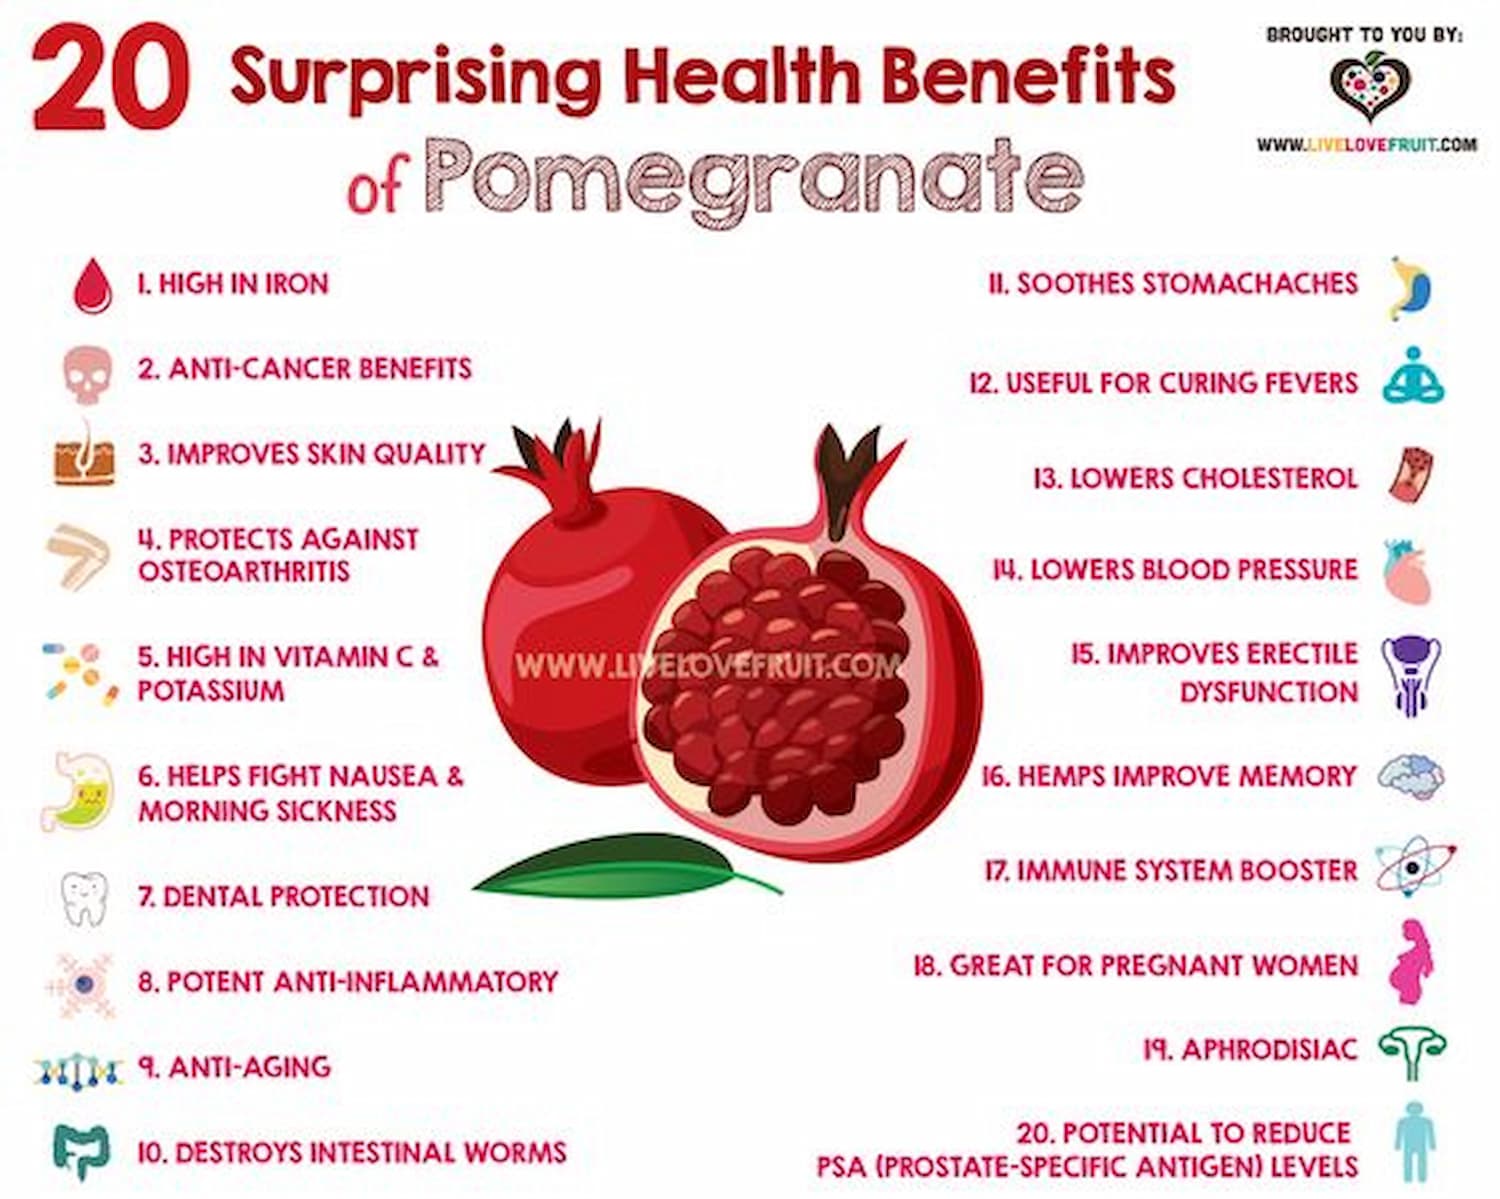 The top health benefits of drinking pomegranate juice